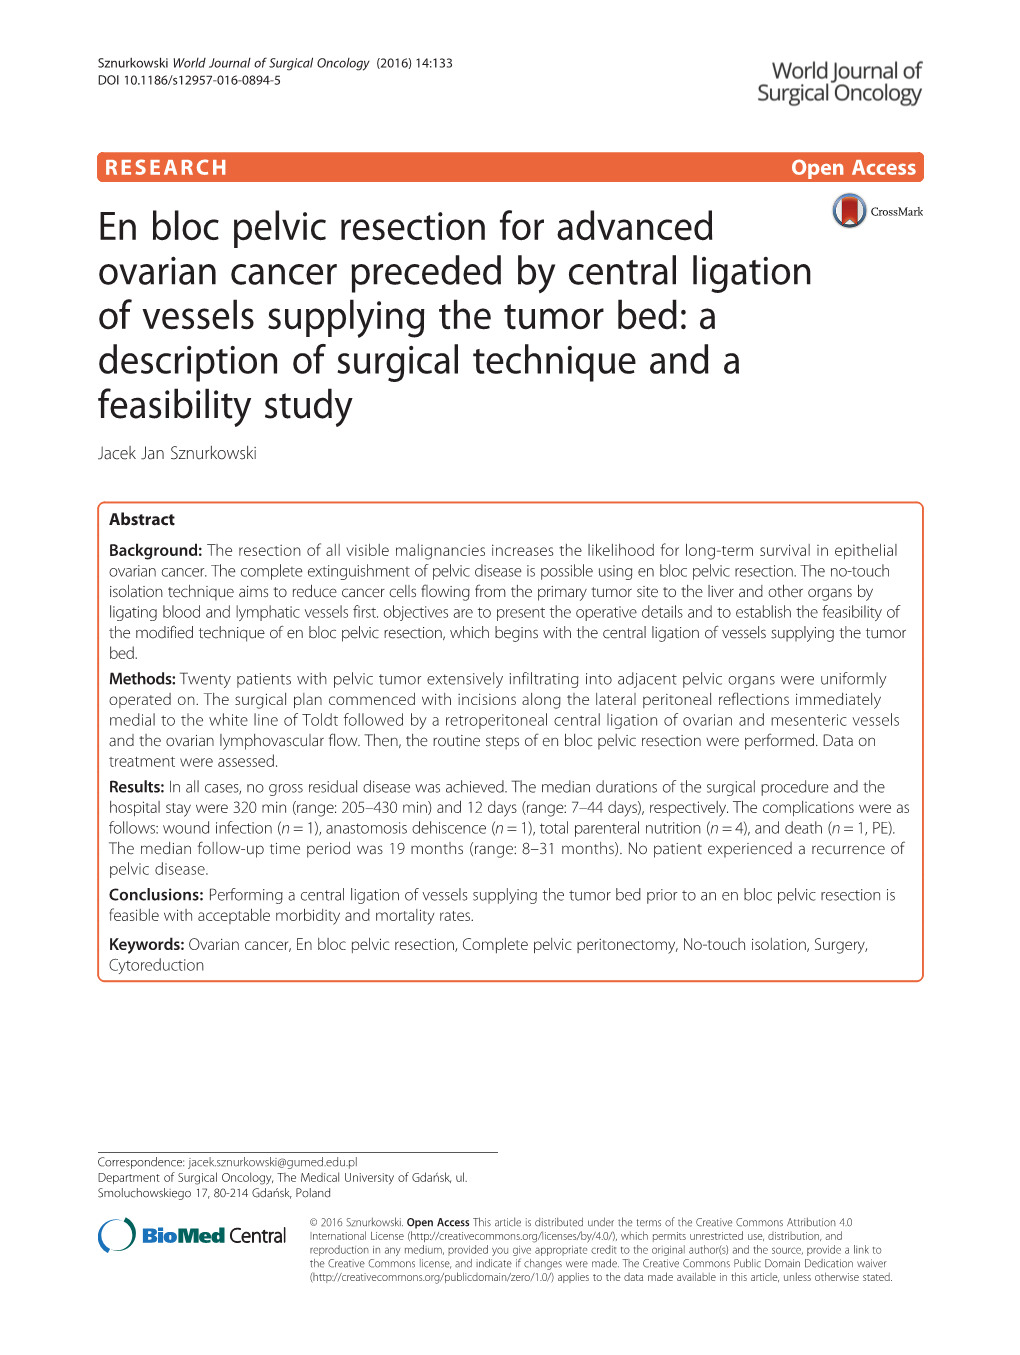 En Bloc Pelvic Resection for Advanced Ovarian Cancer Preceded by Central